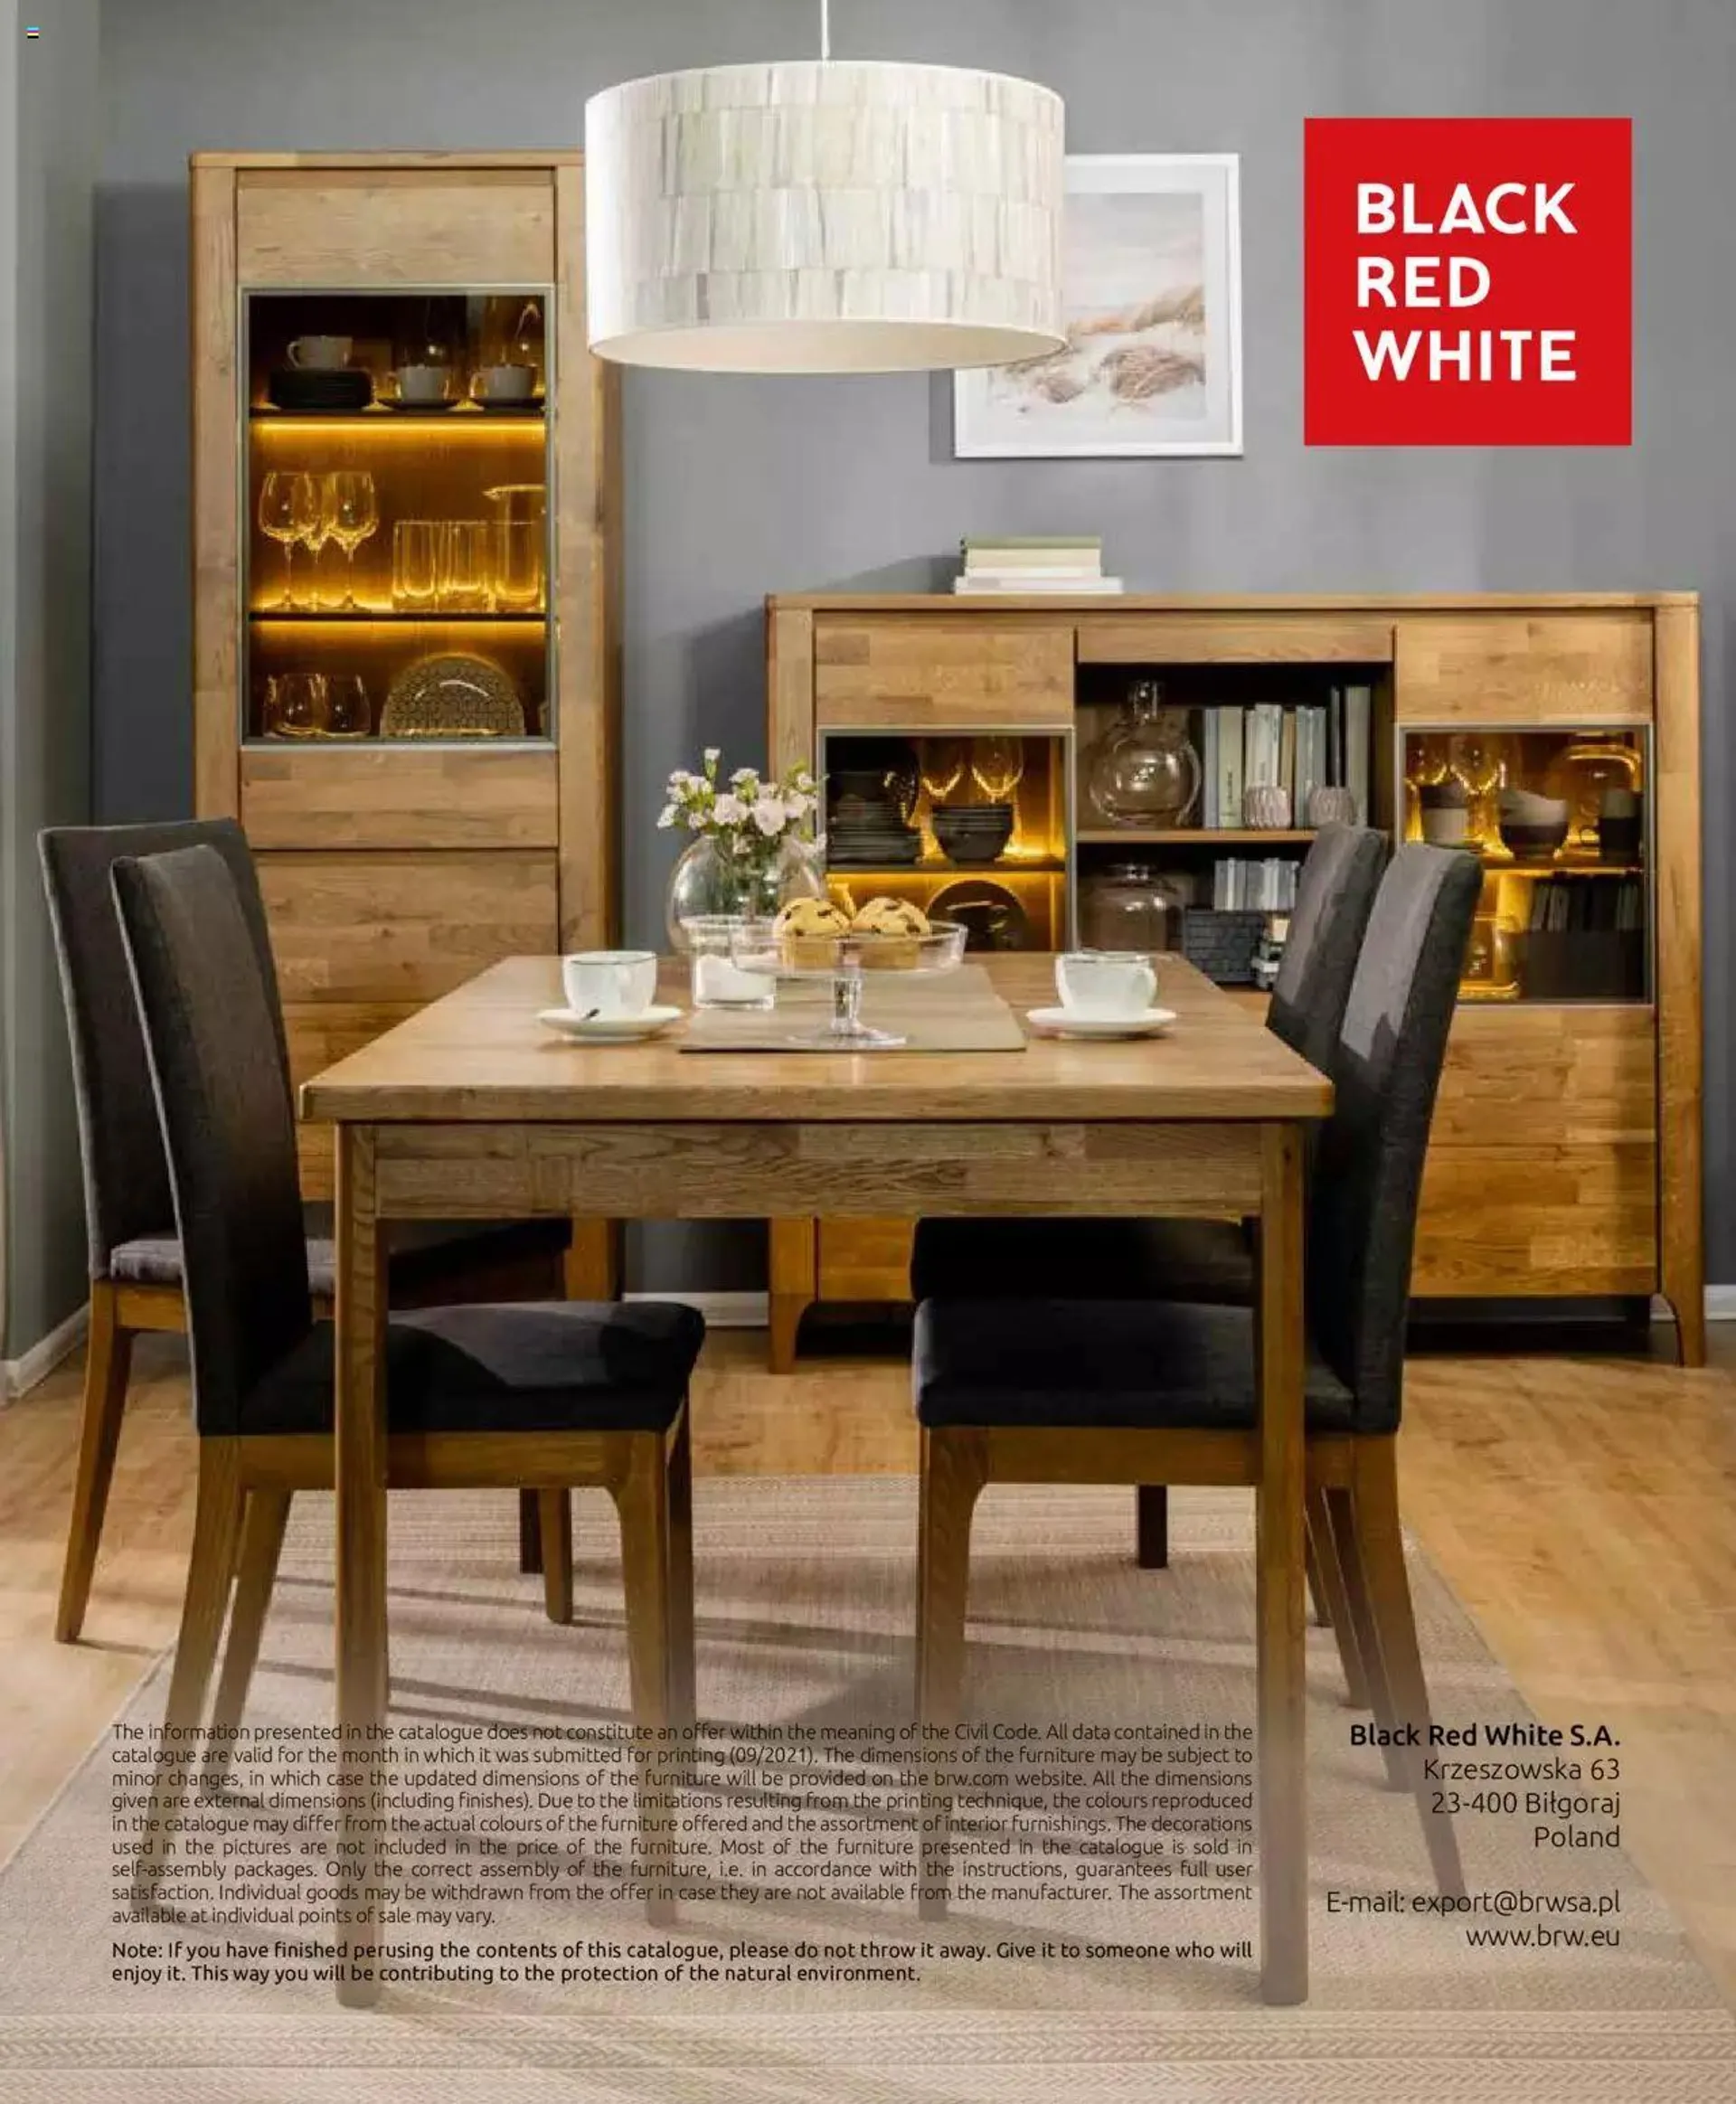 Black Red White - Family Interiors Catalogue 2021/2022 - 131